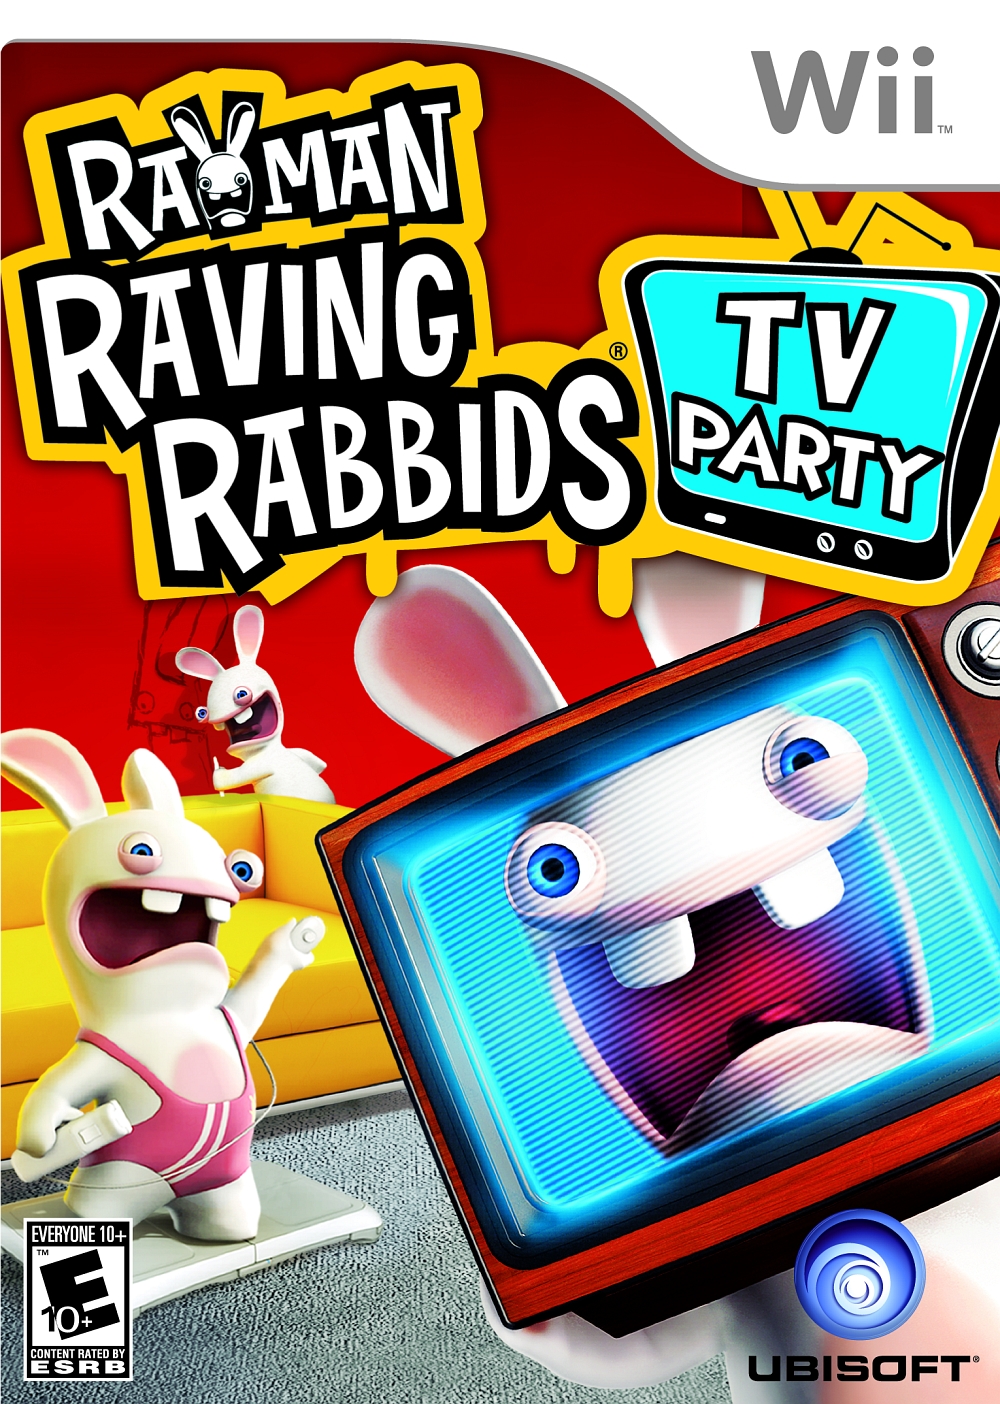 rayman raving rabbids tv party review